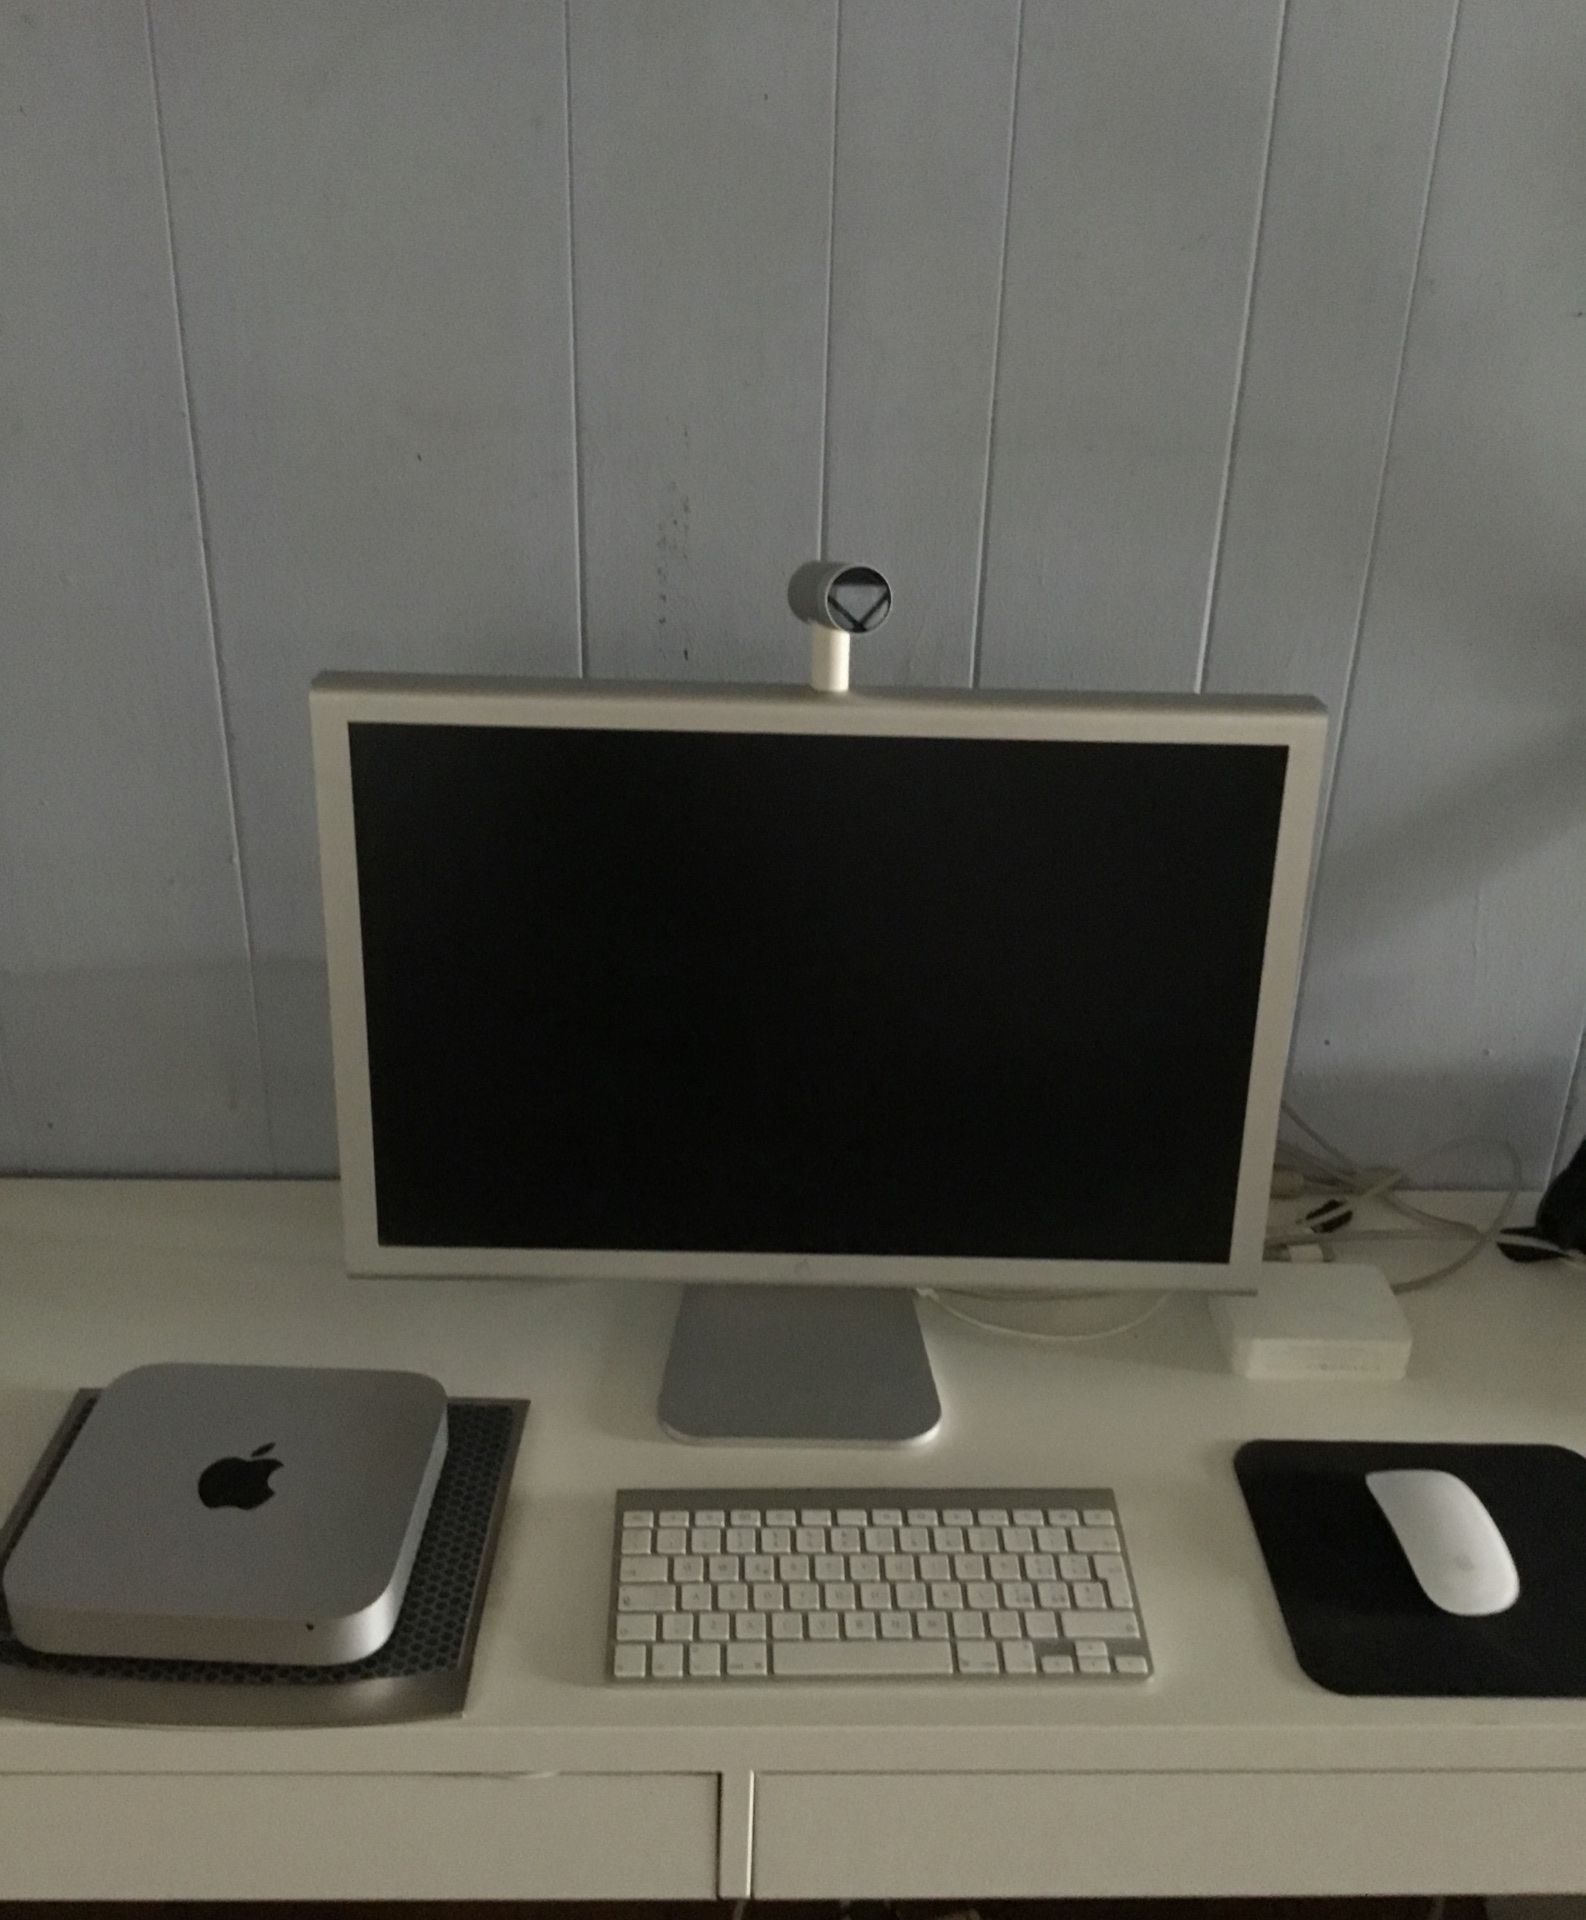 For sale or trade Mac mini, monitor, wireless keyboard and mouse